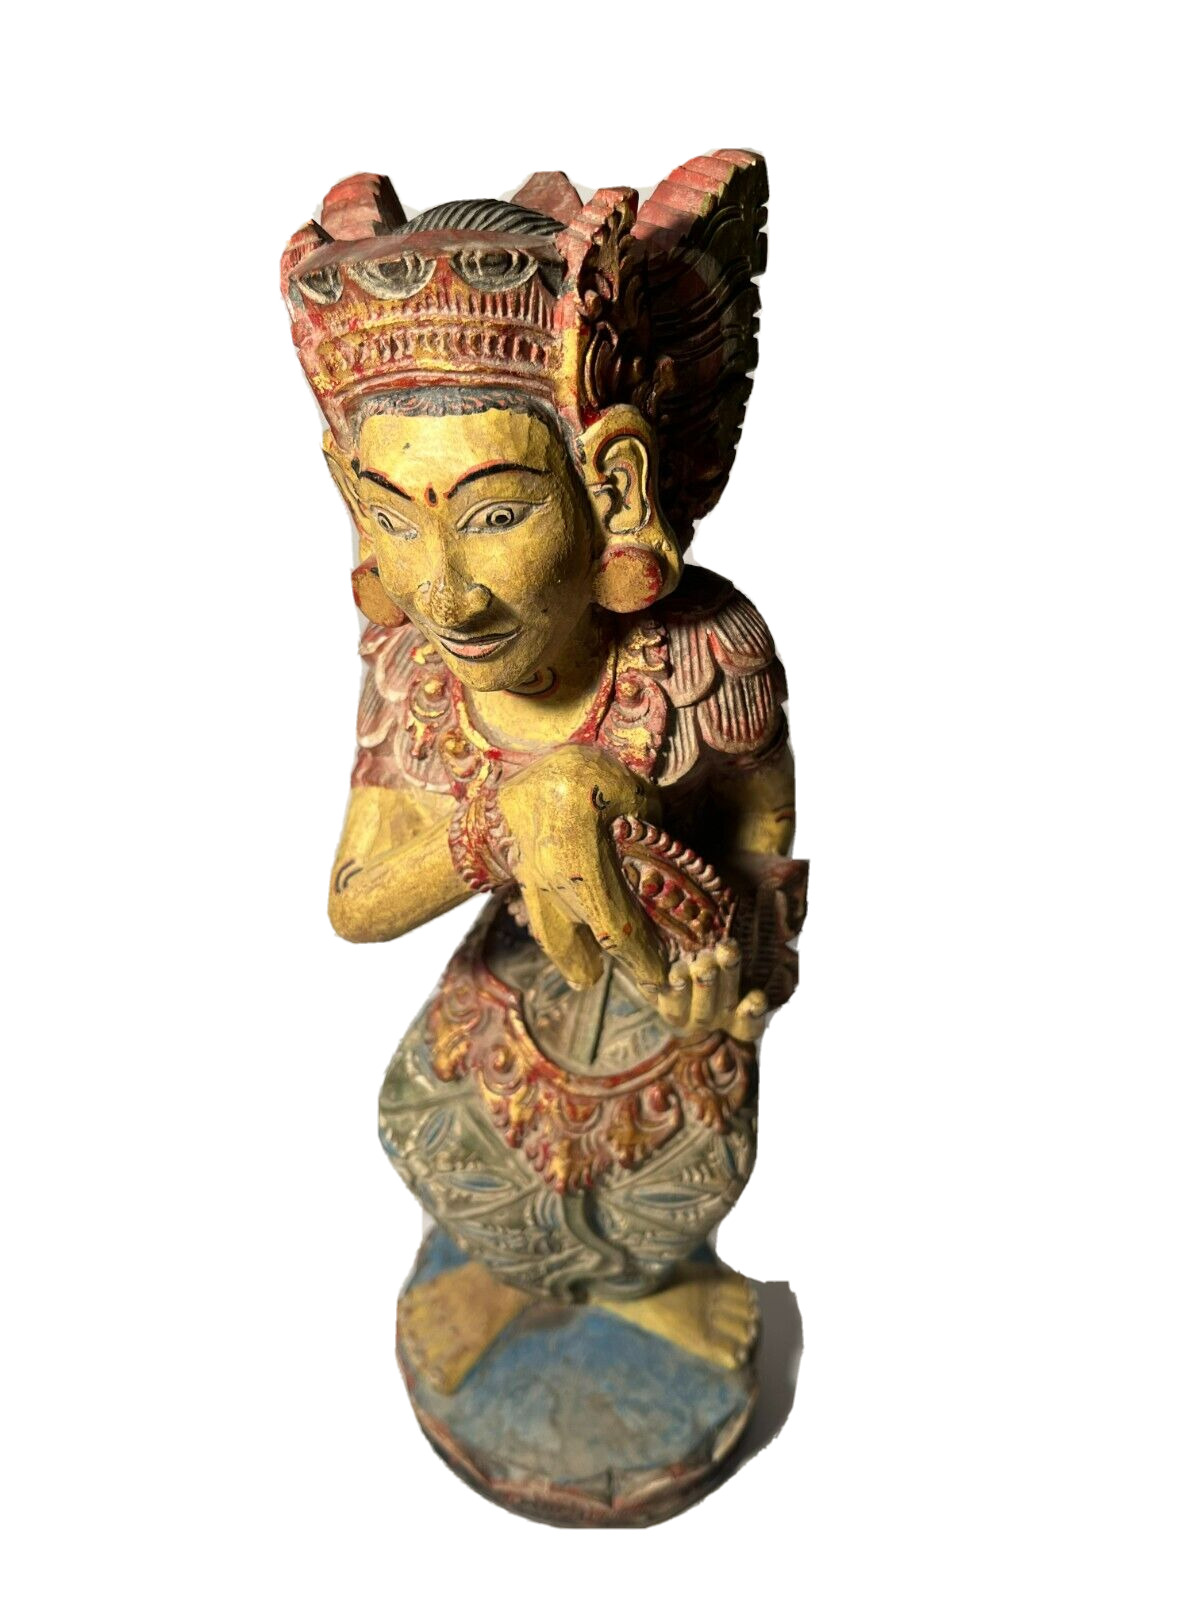 Antique Asian Merchant Buddha Hand Carved & Painted Artwork 12” Sculpture, 19th